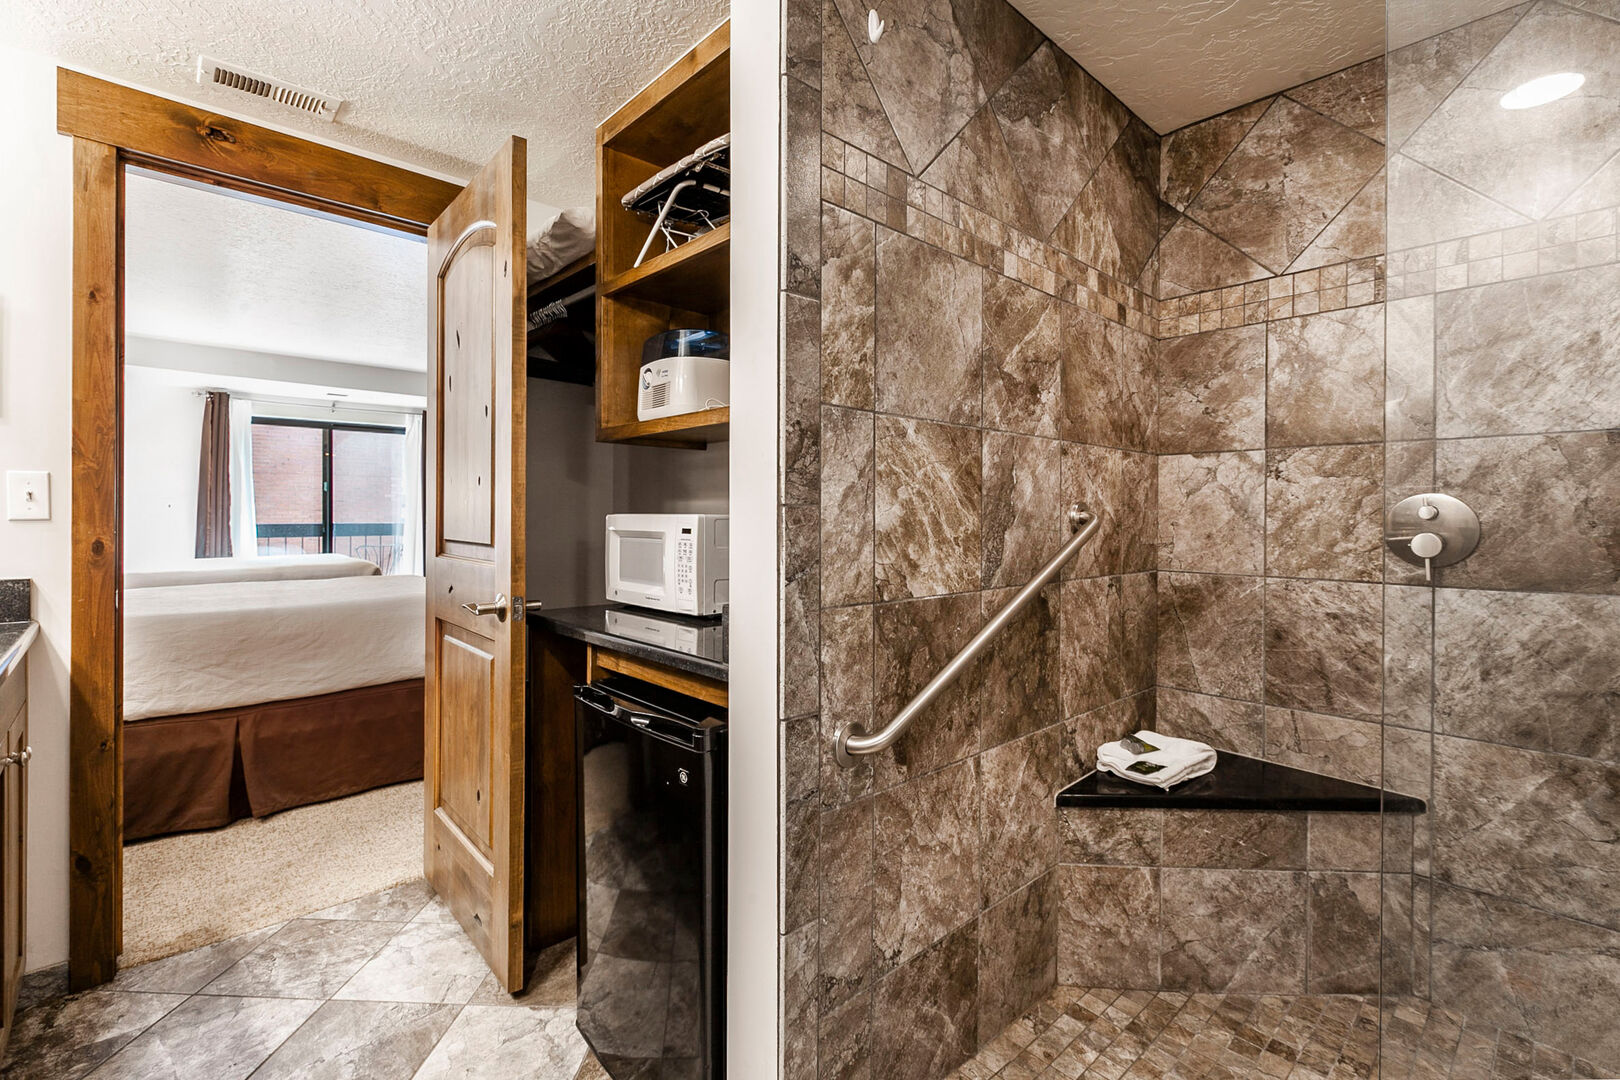 Ensuite Bathroom with Walk-in Shower & Mini fridge, coffee maker, and microwave